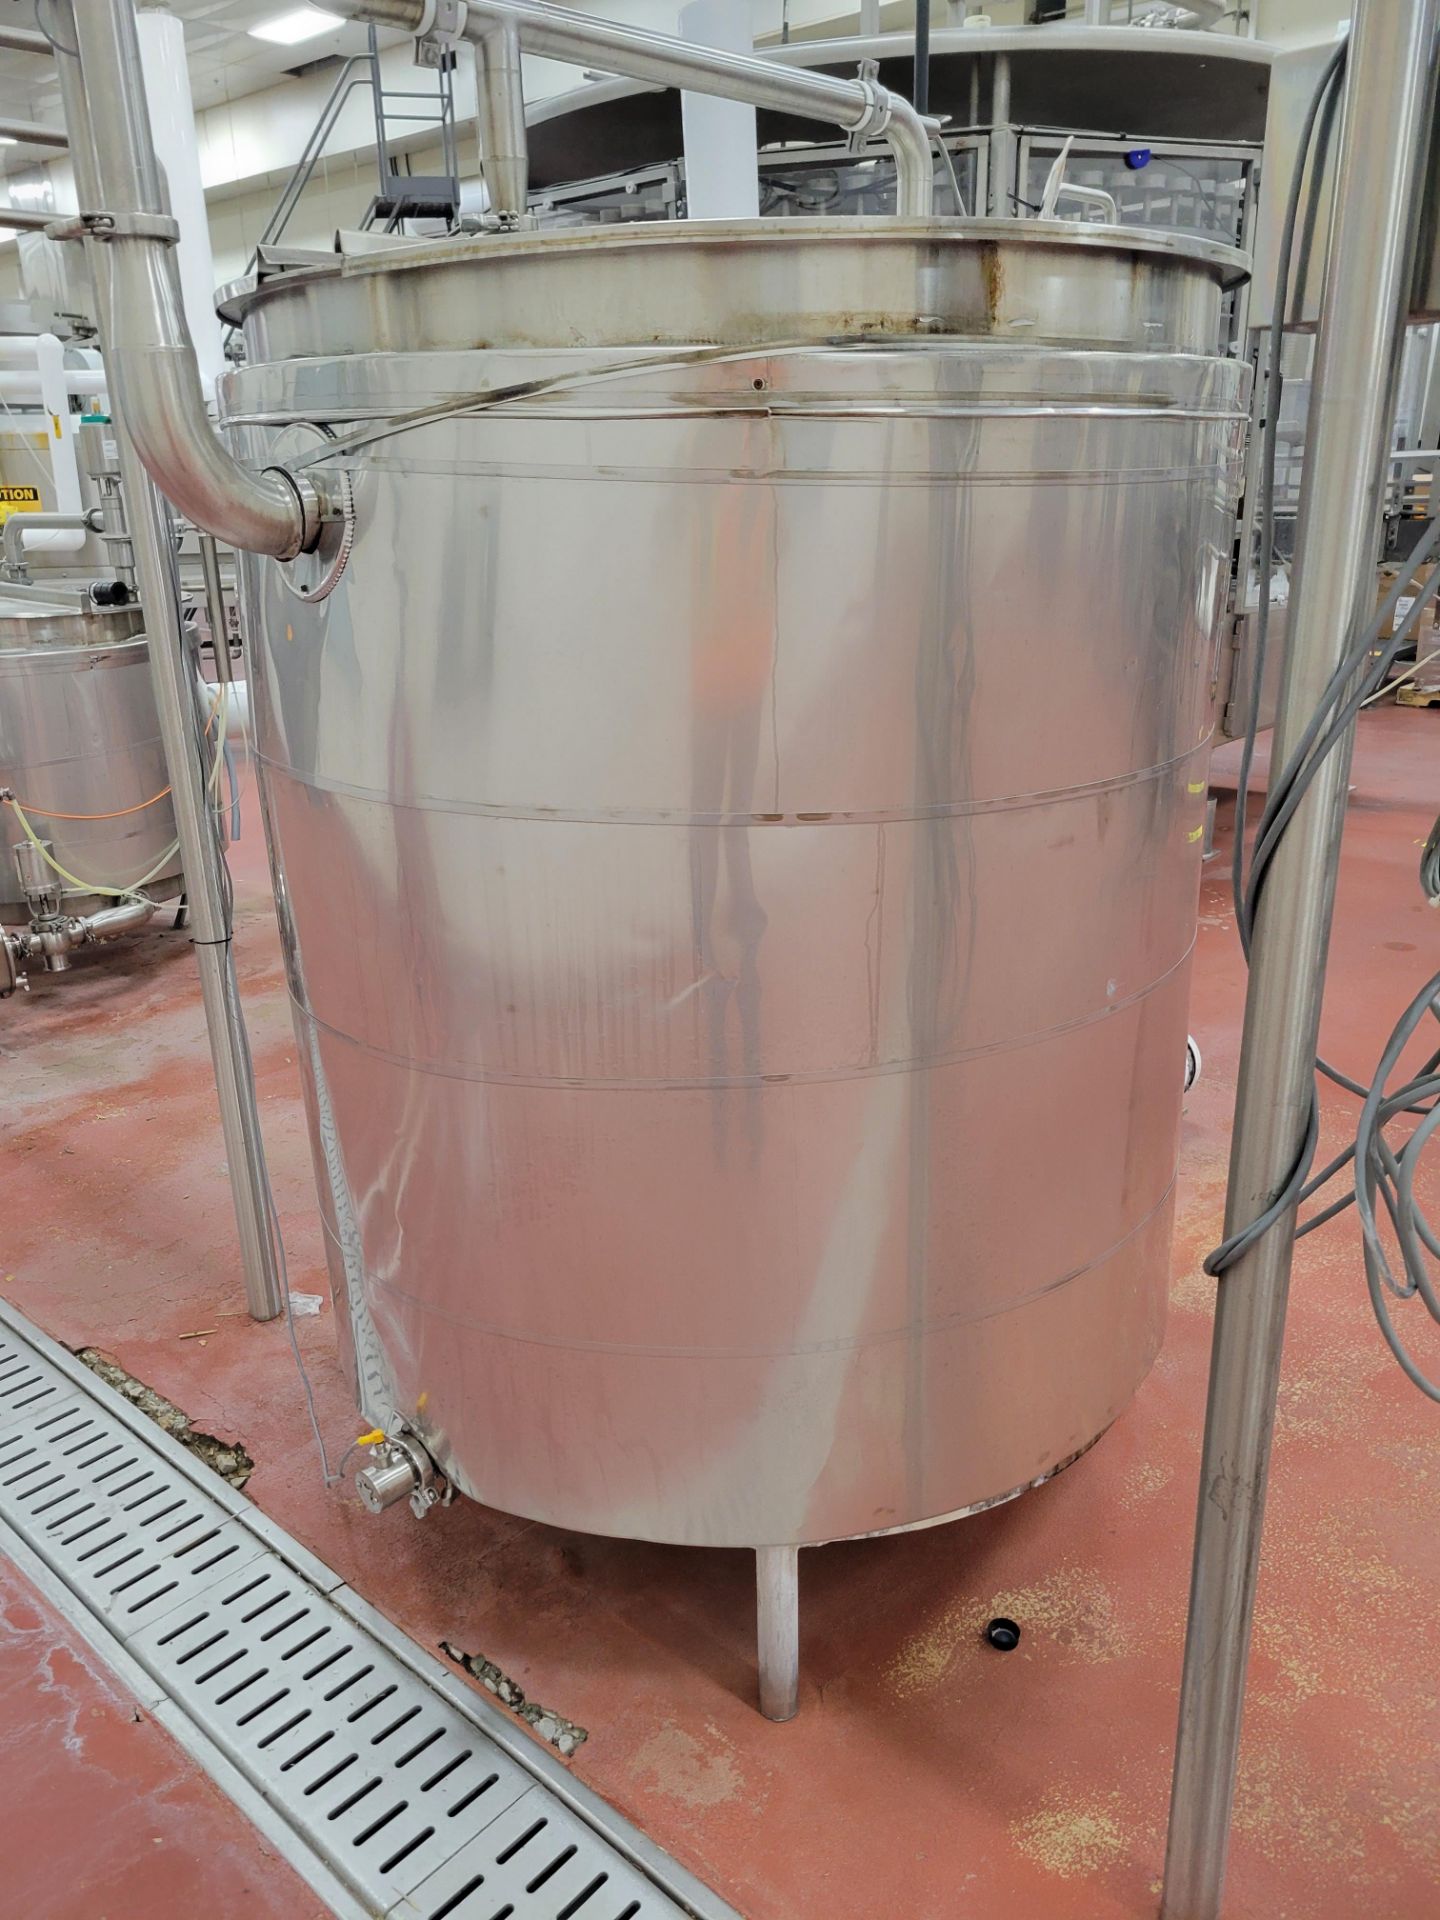 Stainless Steel Supply Tank for Filler - Image 5 of 6